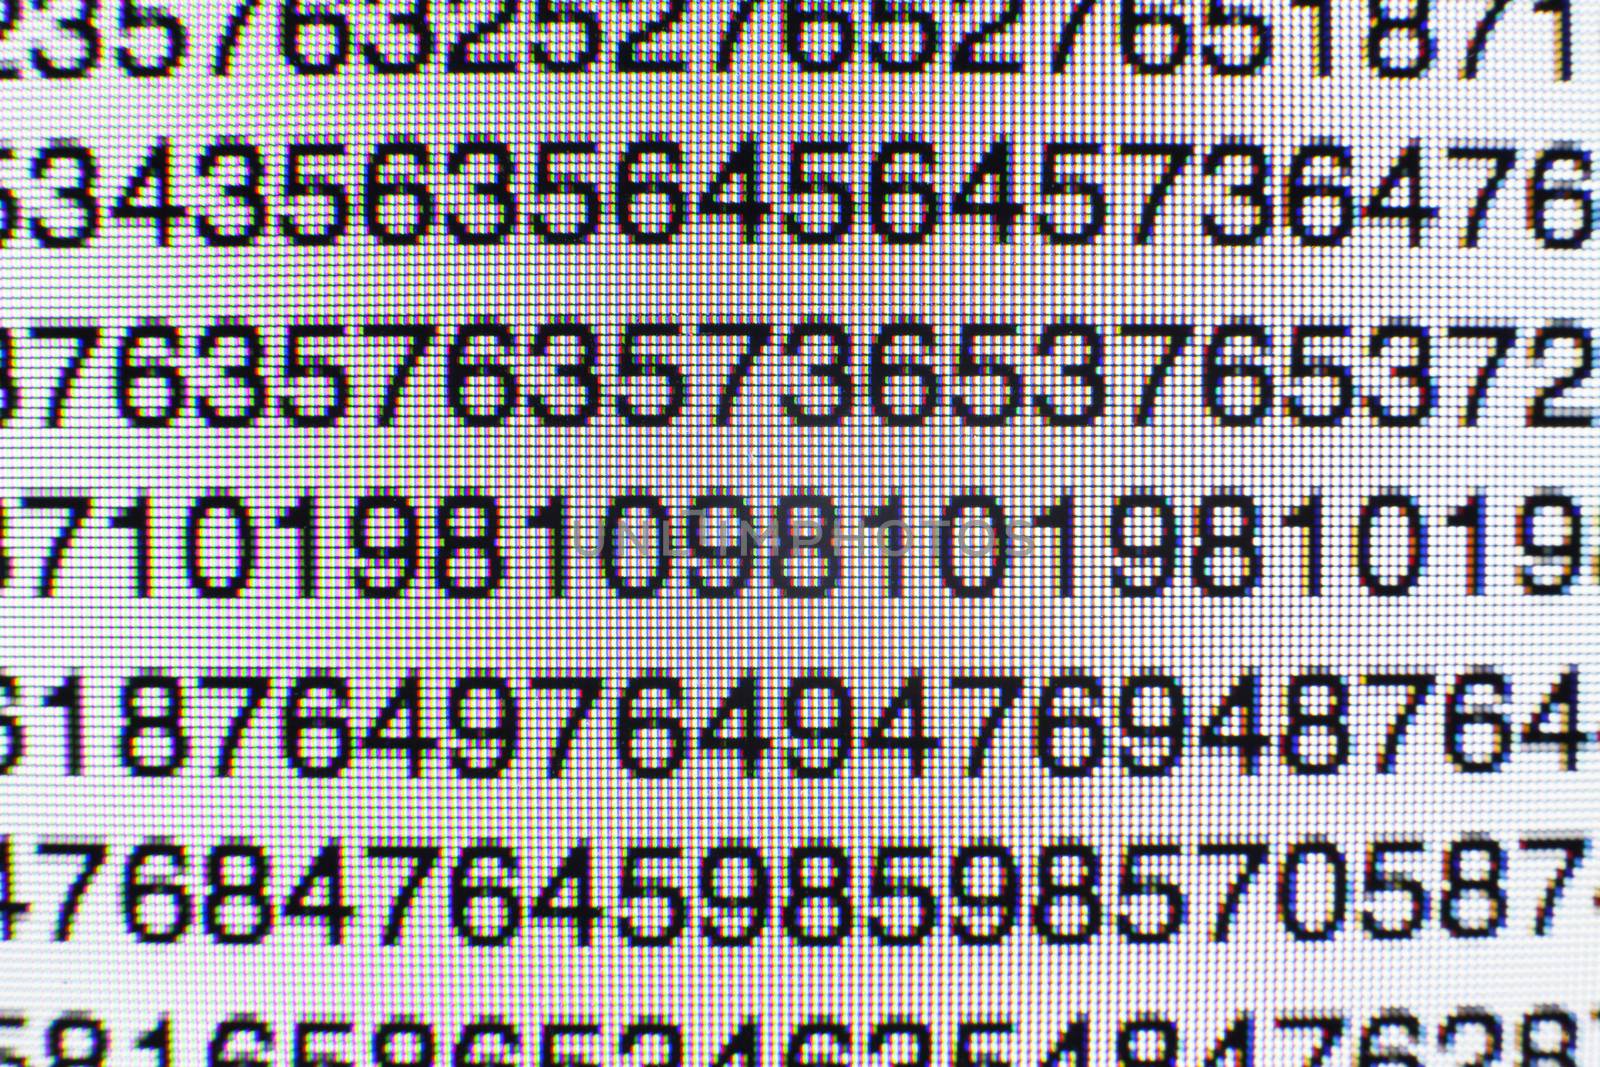 Numbers on a computer screen